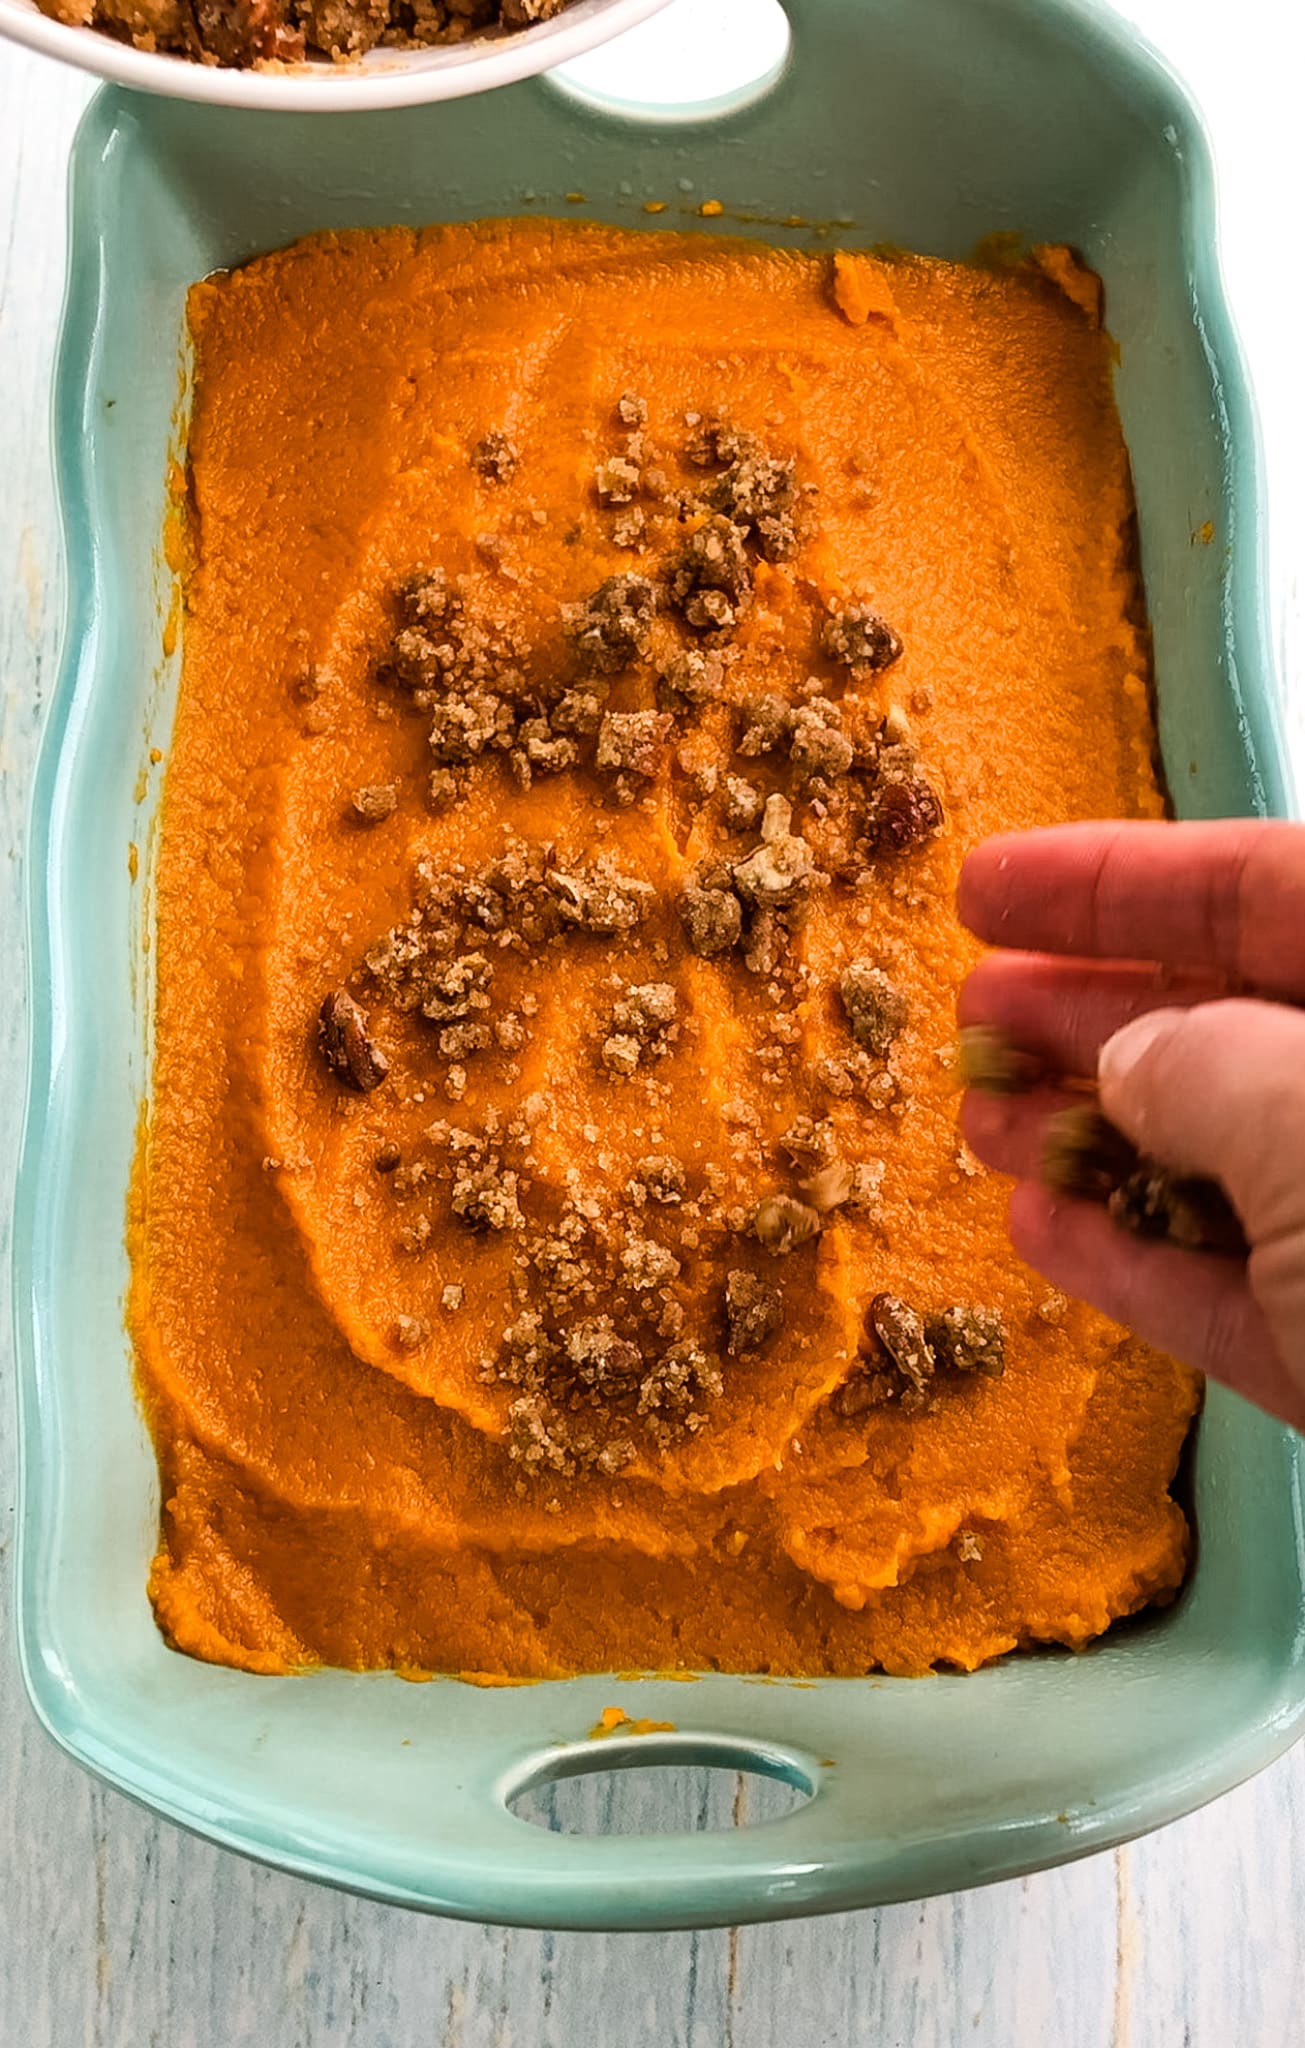 Pecan crumble topping being added to sweet potatoes.